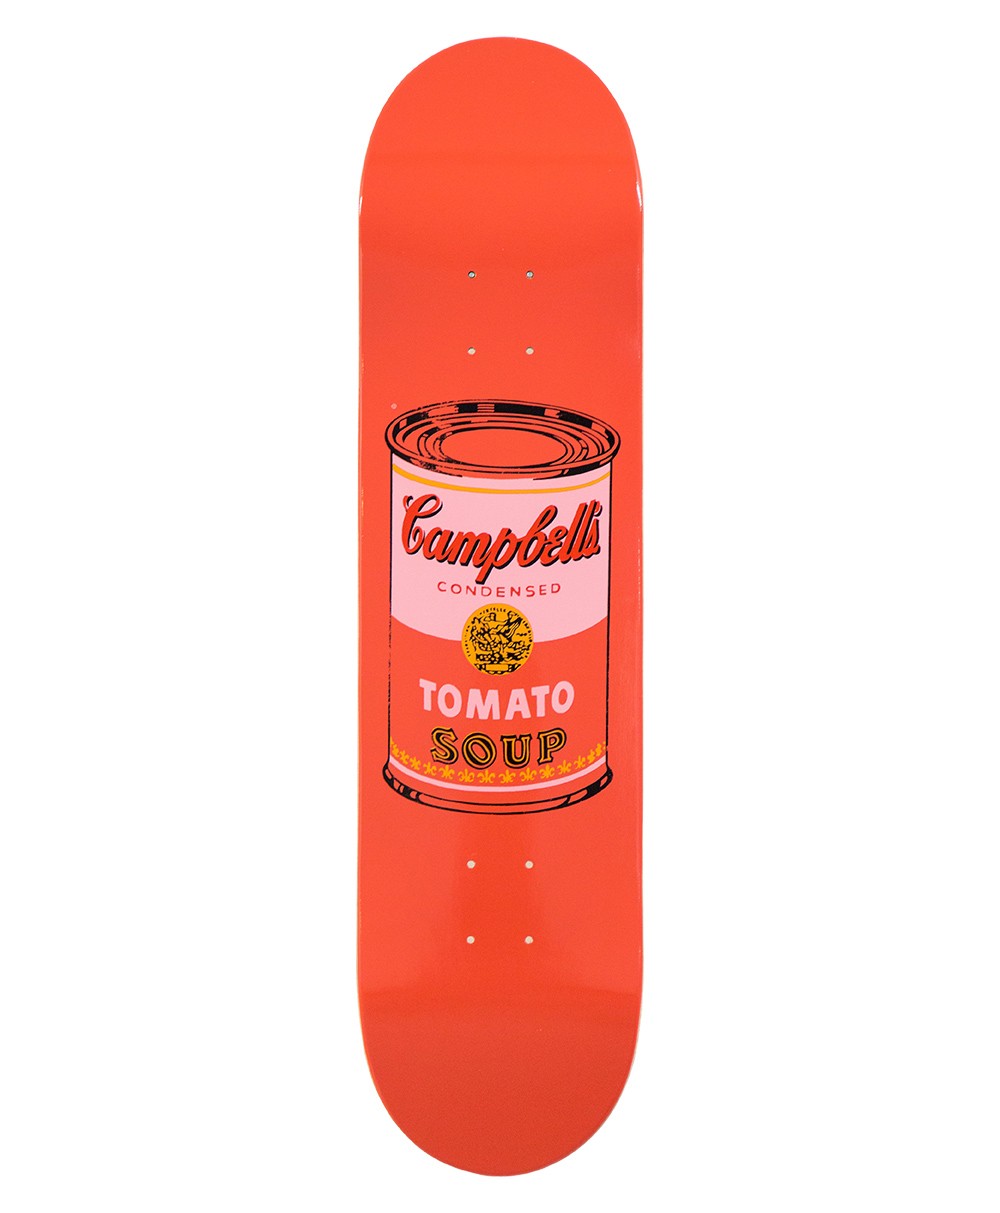 Produktbild "Campbell's Soup Peach" designed by Andy Warhol von The Skateroom im RAUM Conceptstore